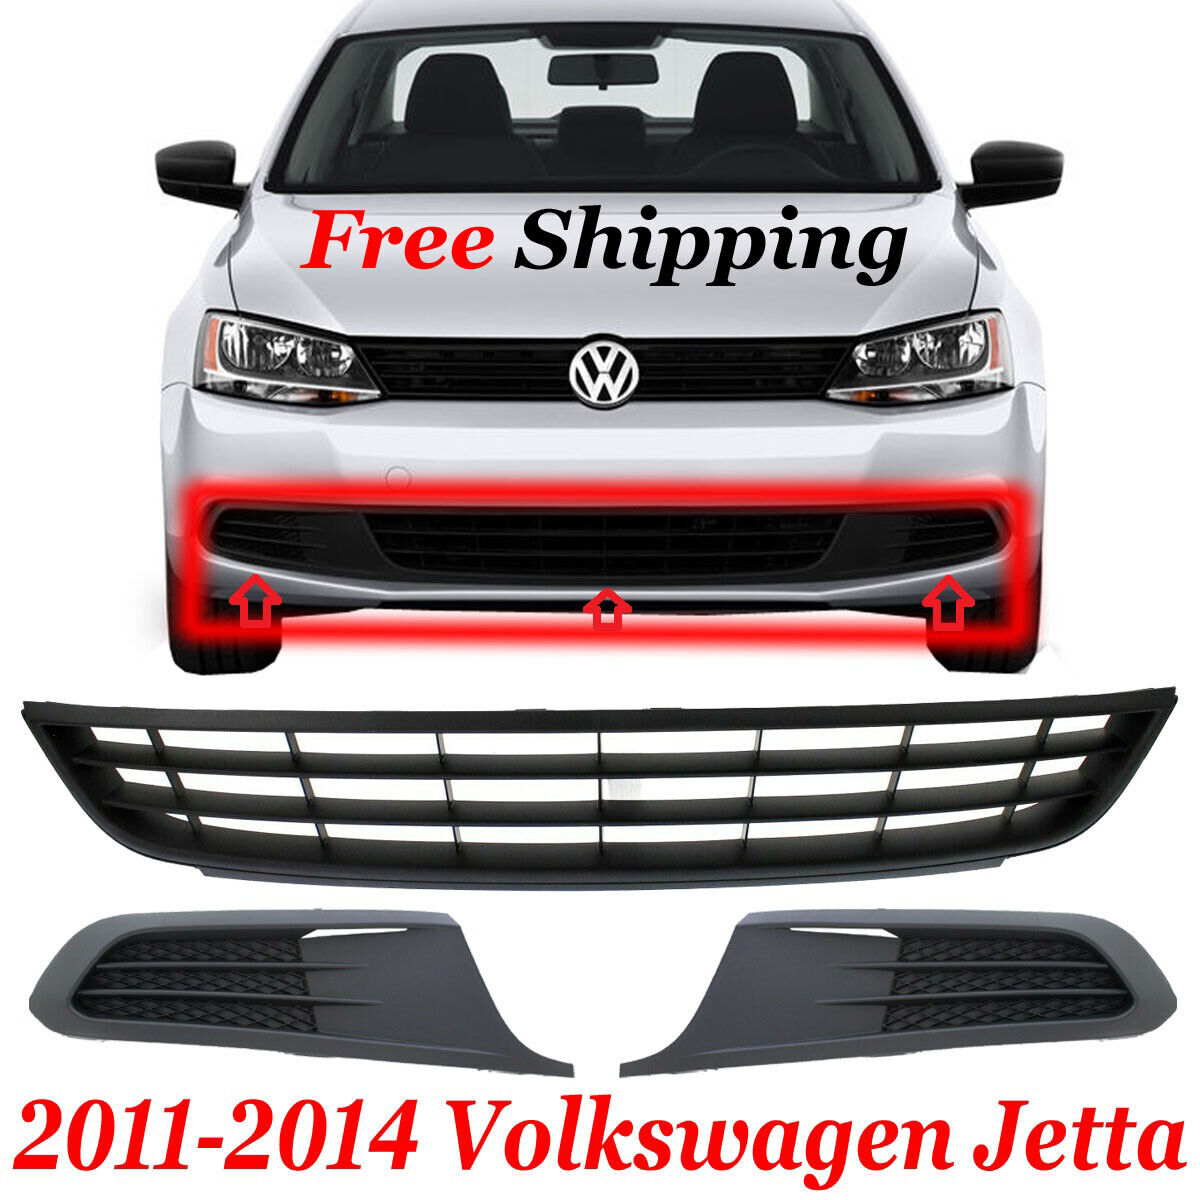 For 2011-2014 Volkswagen Jetta Front New Bumper Lower Grille & Fog Lamp Covers